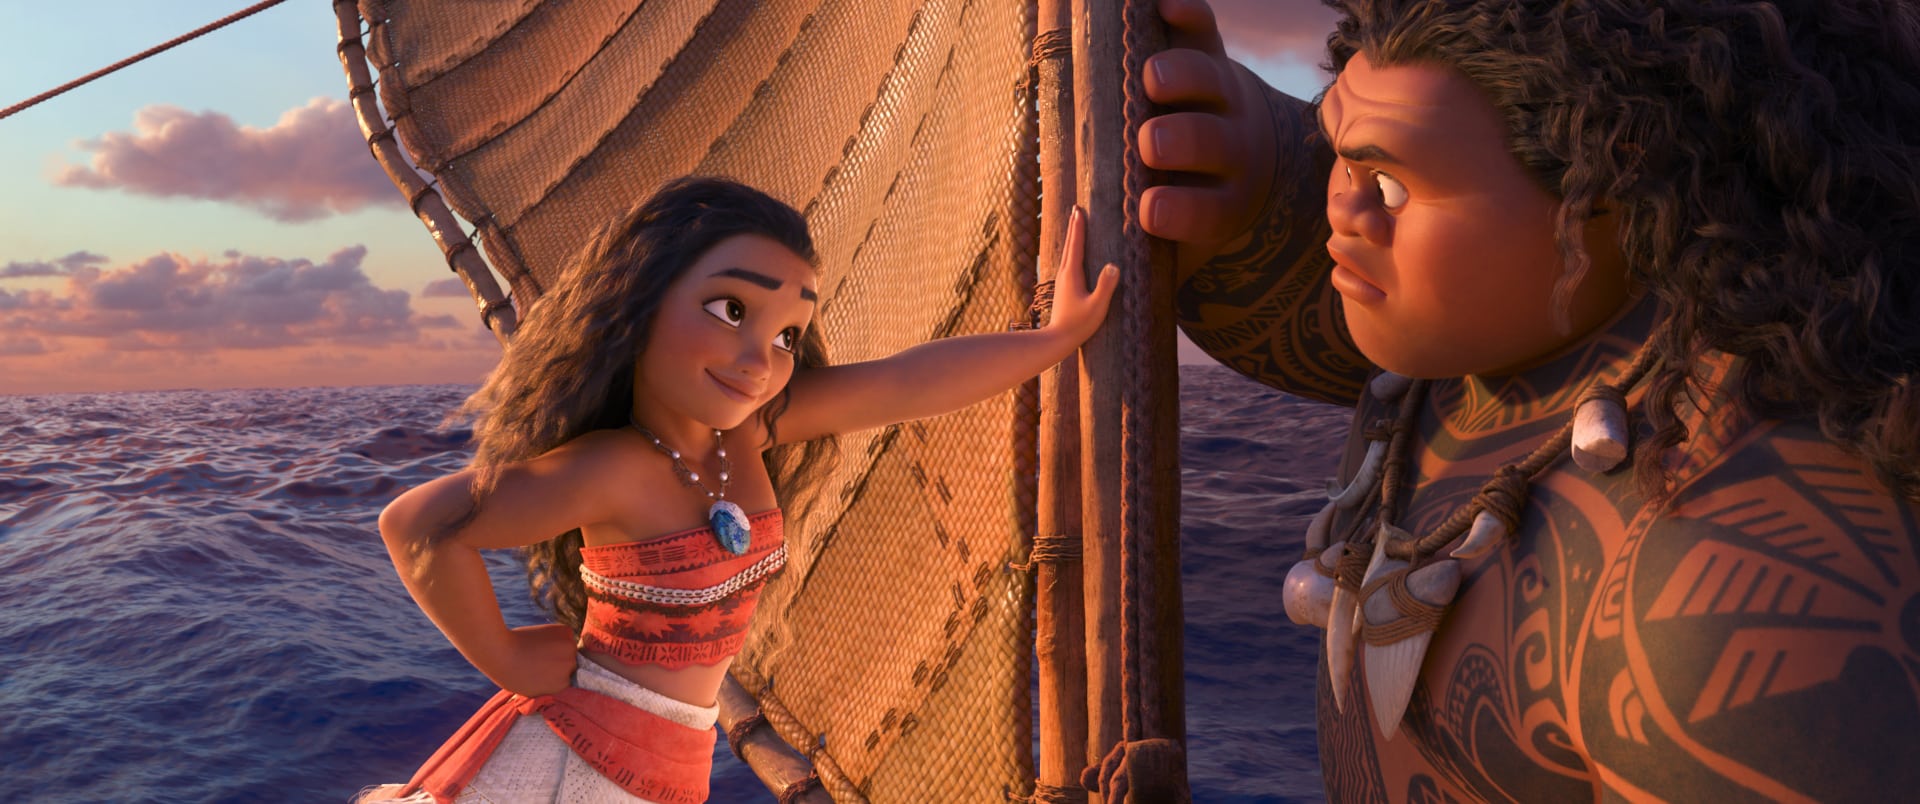 Tenacious teenager Moana (voice of Auliʻi Cravalho) recruits a demigod named Maui (voice of Dwayne Johnson) to help her become a master wayfinder and sail out on a daring mission to save her people. Directed by the renowned filmmaking team of Ron Clements and John Musker, produced by Osnat Shurer, and featuring music by Lin-Manuel Miranda, Mark Mancina and Opetaia Foa‘i, “Moana” sails into U.S. theaters on Nov. 23, 2016.  ©2016 Disney. All Rights Reserved.